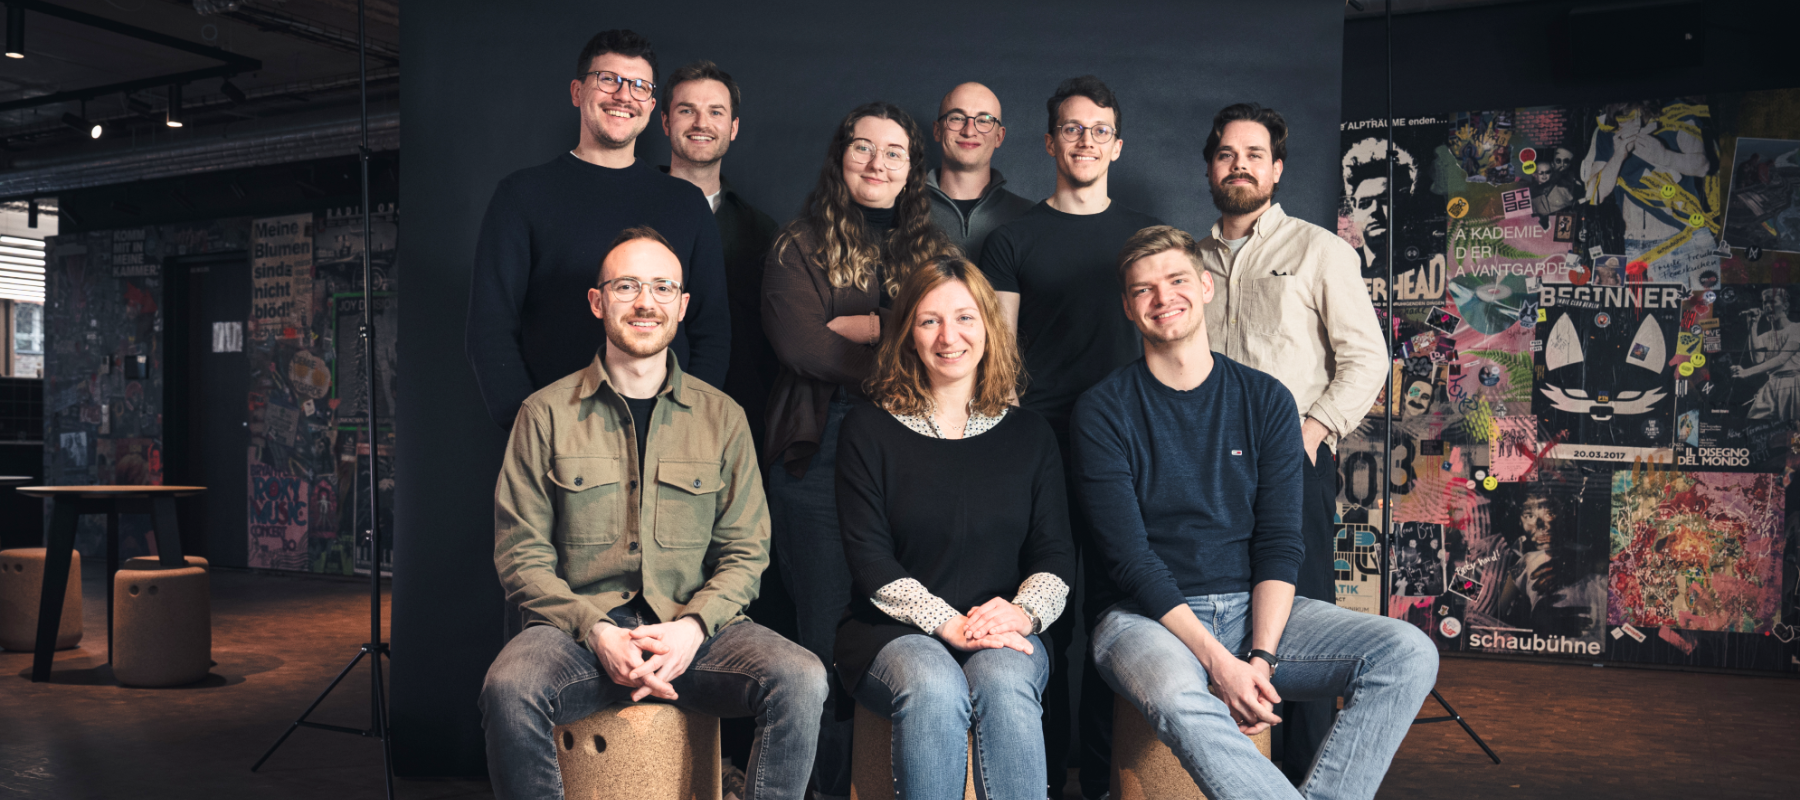 German data startup acto secures €3.7m seed funding to empower B2B sales teams